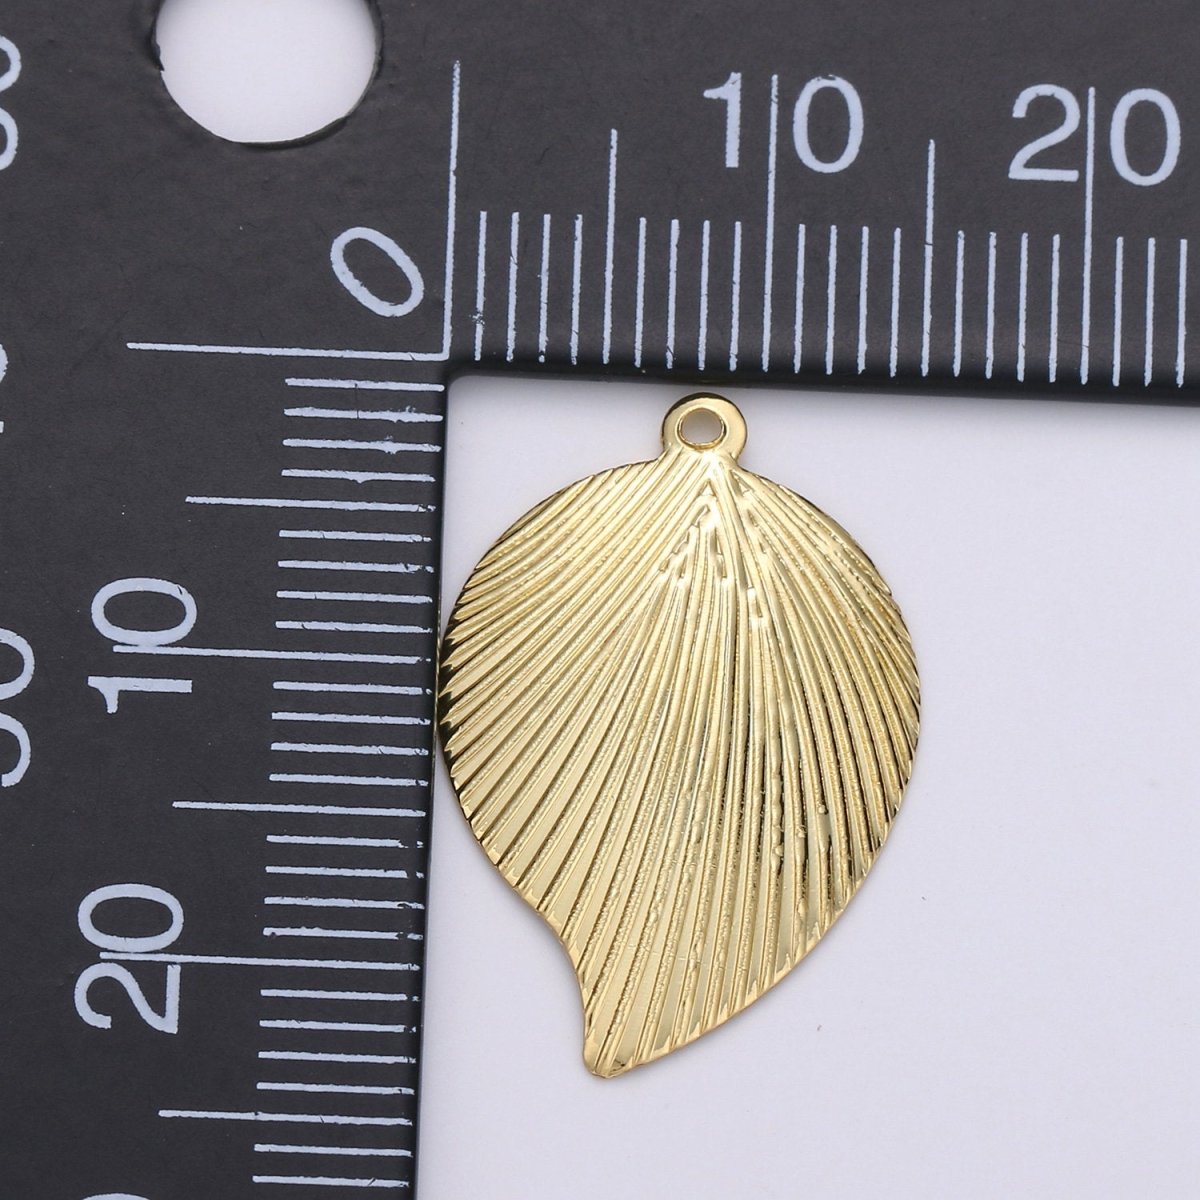 Dainty Flat Leaf Charm Pendant Gold leaf petal charm for DIY Jewelry Making 24k Gold Filled Findings, D-462 - DLUXCA